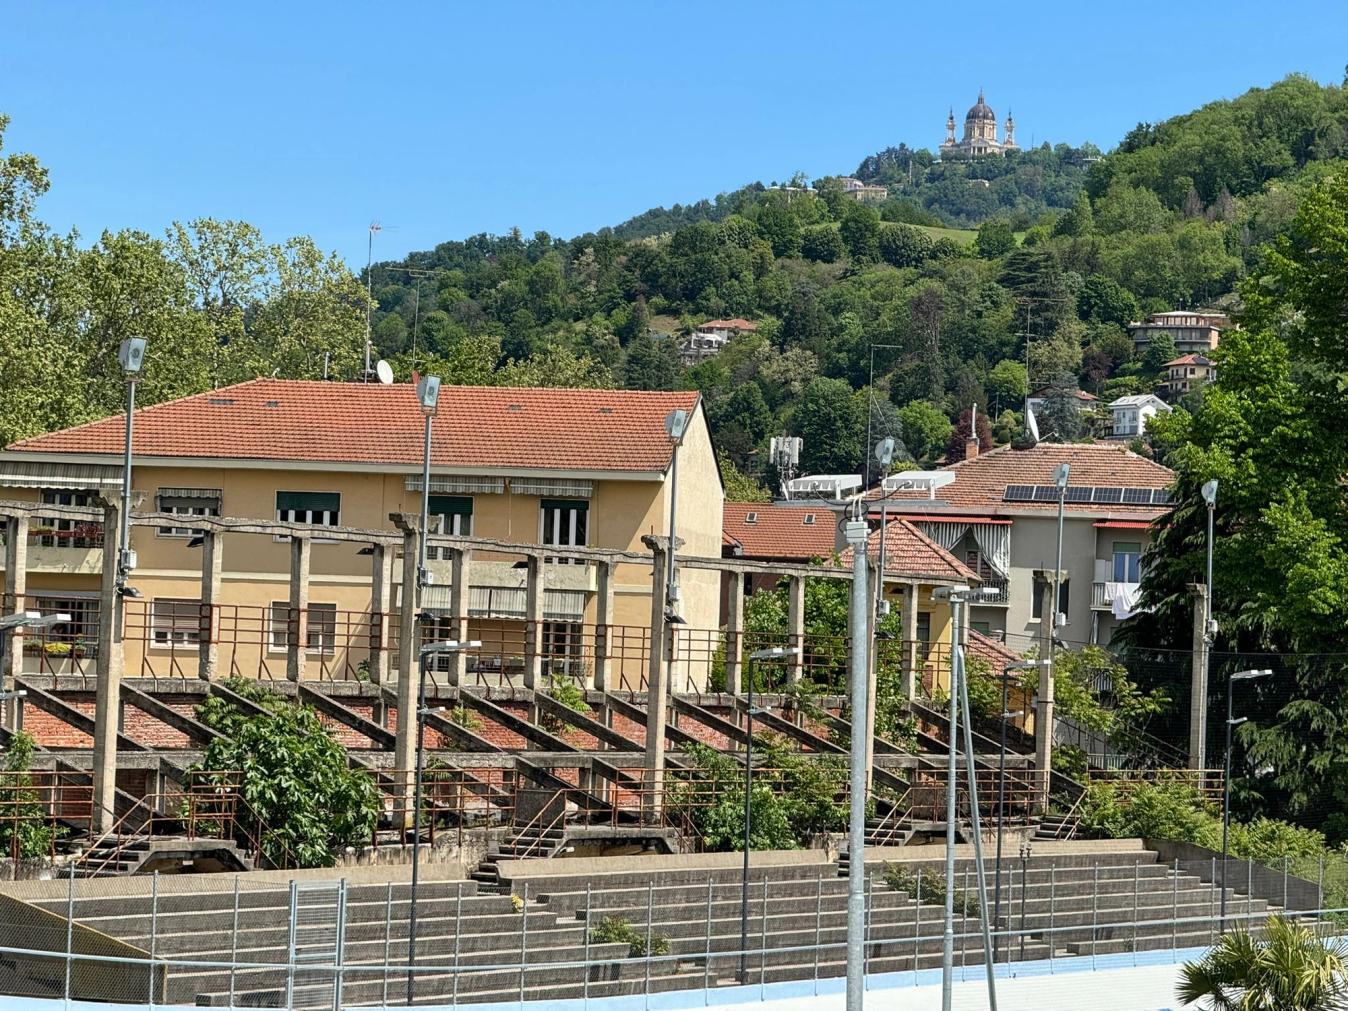 The Superga Basilica overlooks the track, where the remnants of the old tribunes will soon be renewed with more sporting projects